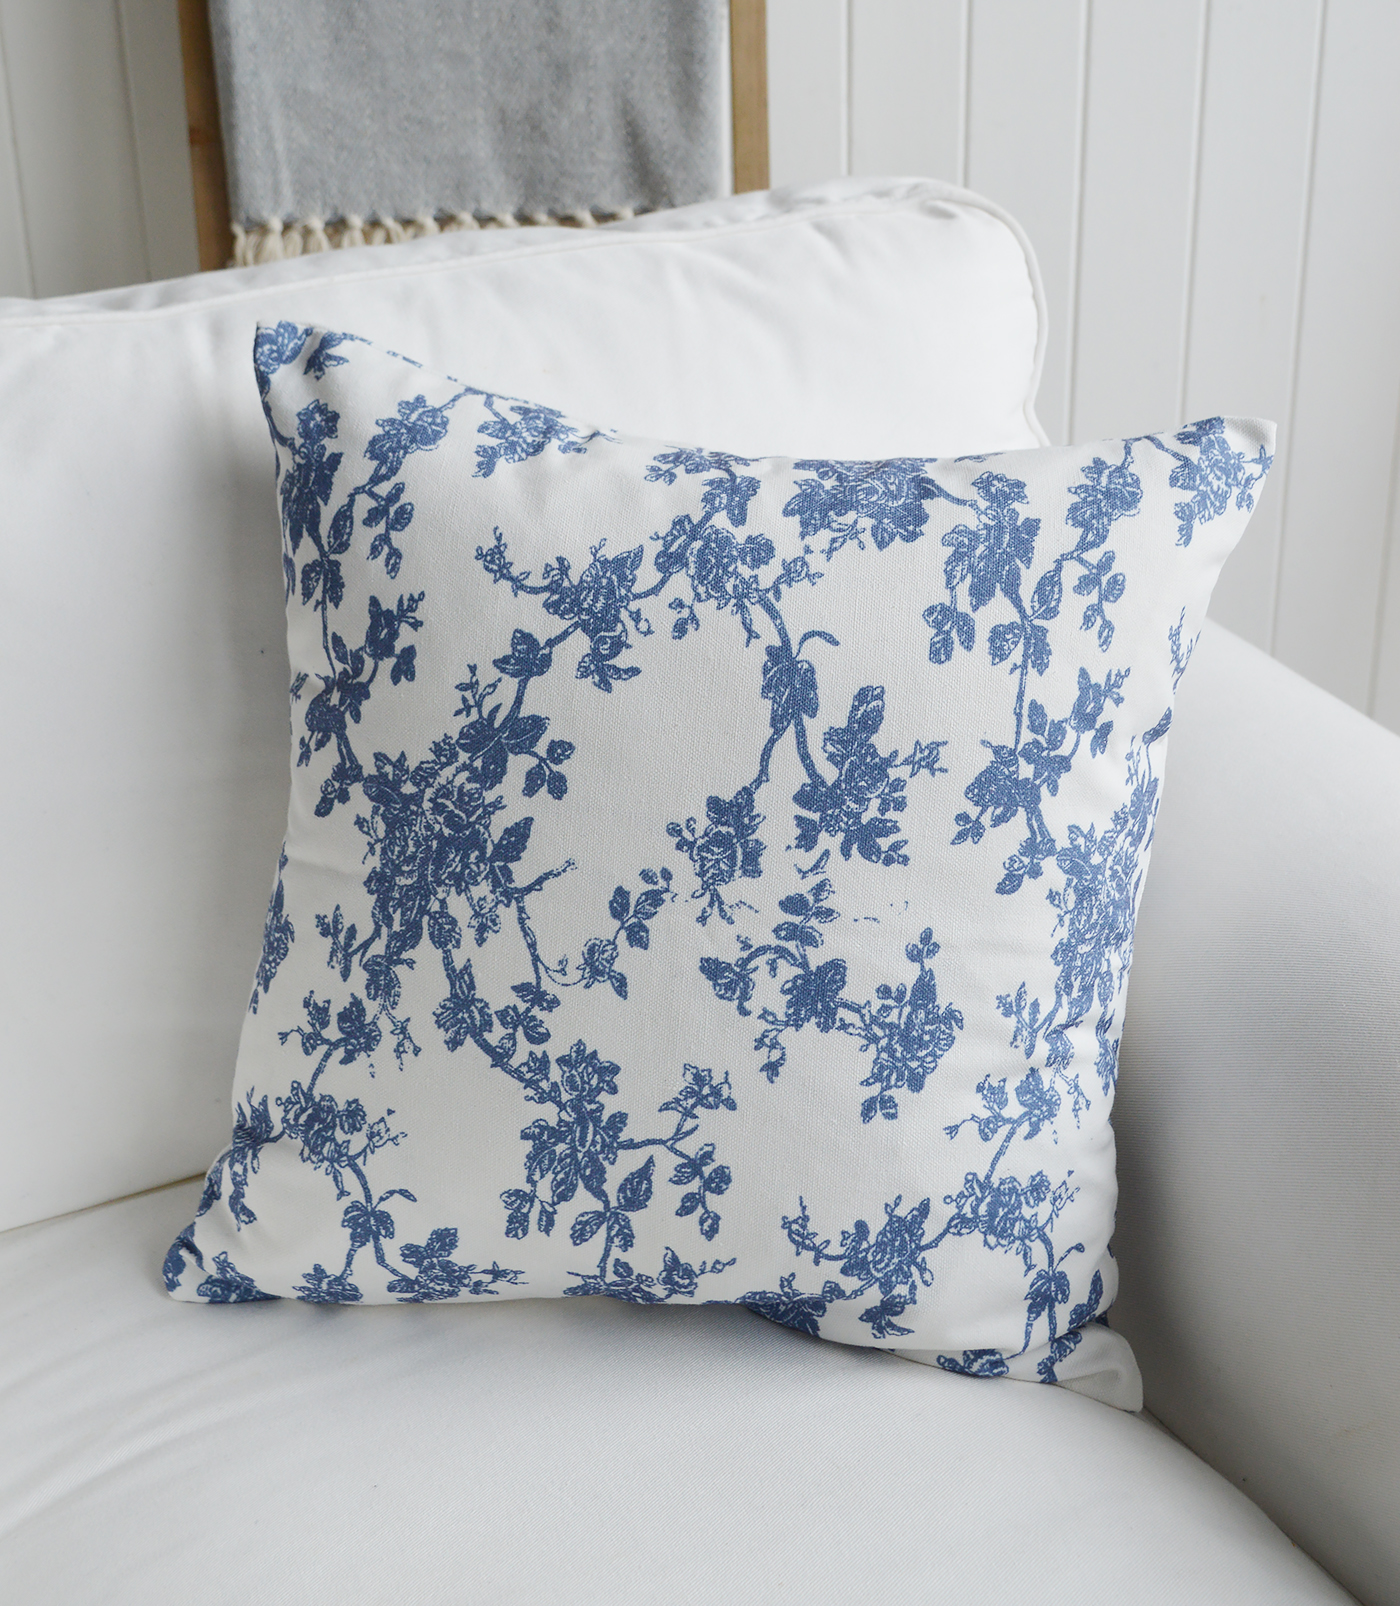 Marlow blue and white printed floral cushions for New England styled interiors